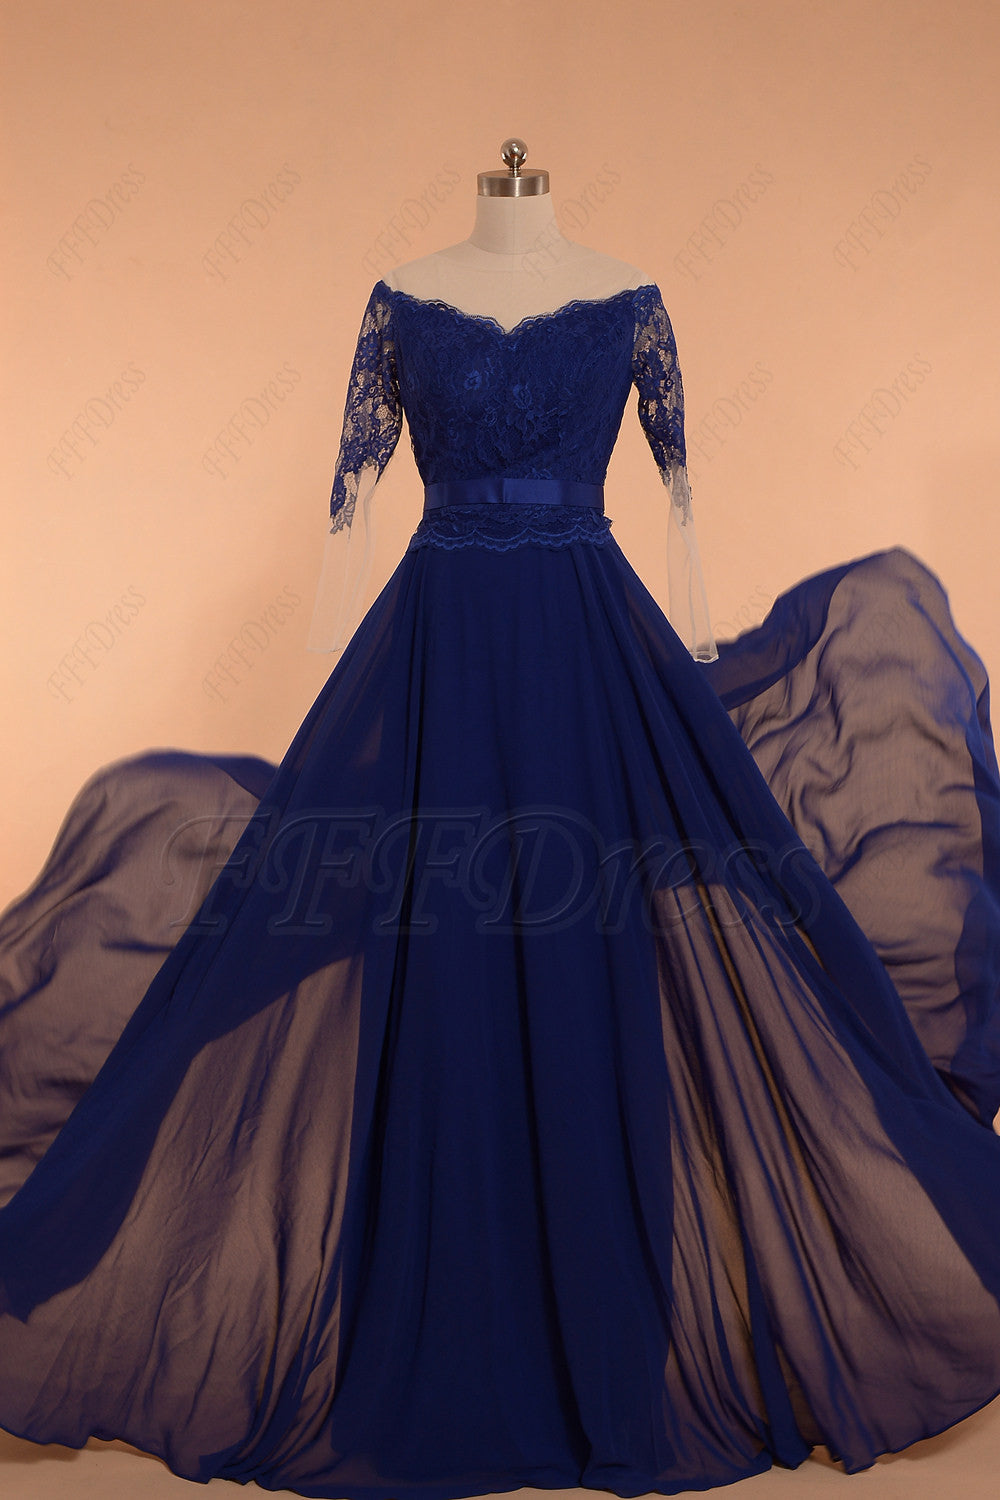 Royal blue mother of the bride dress with sleeves